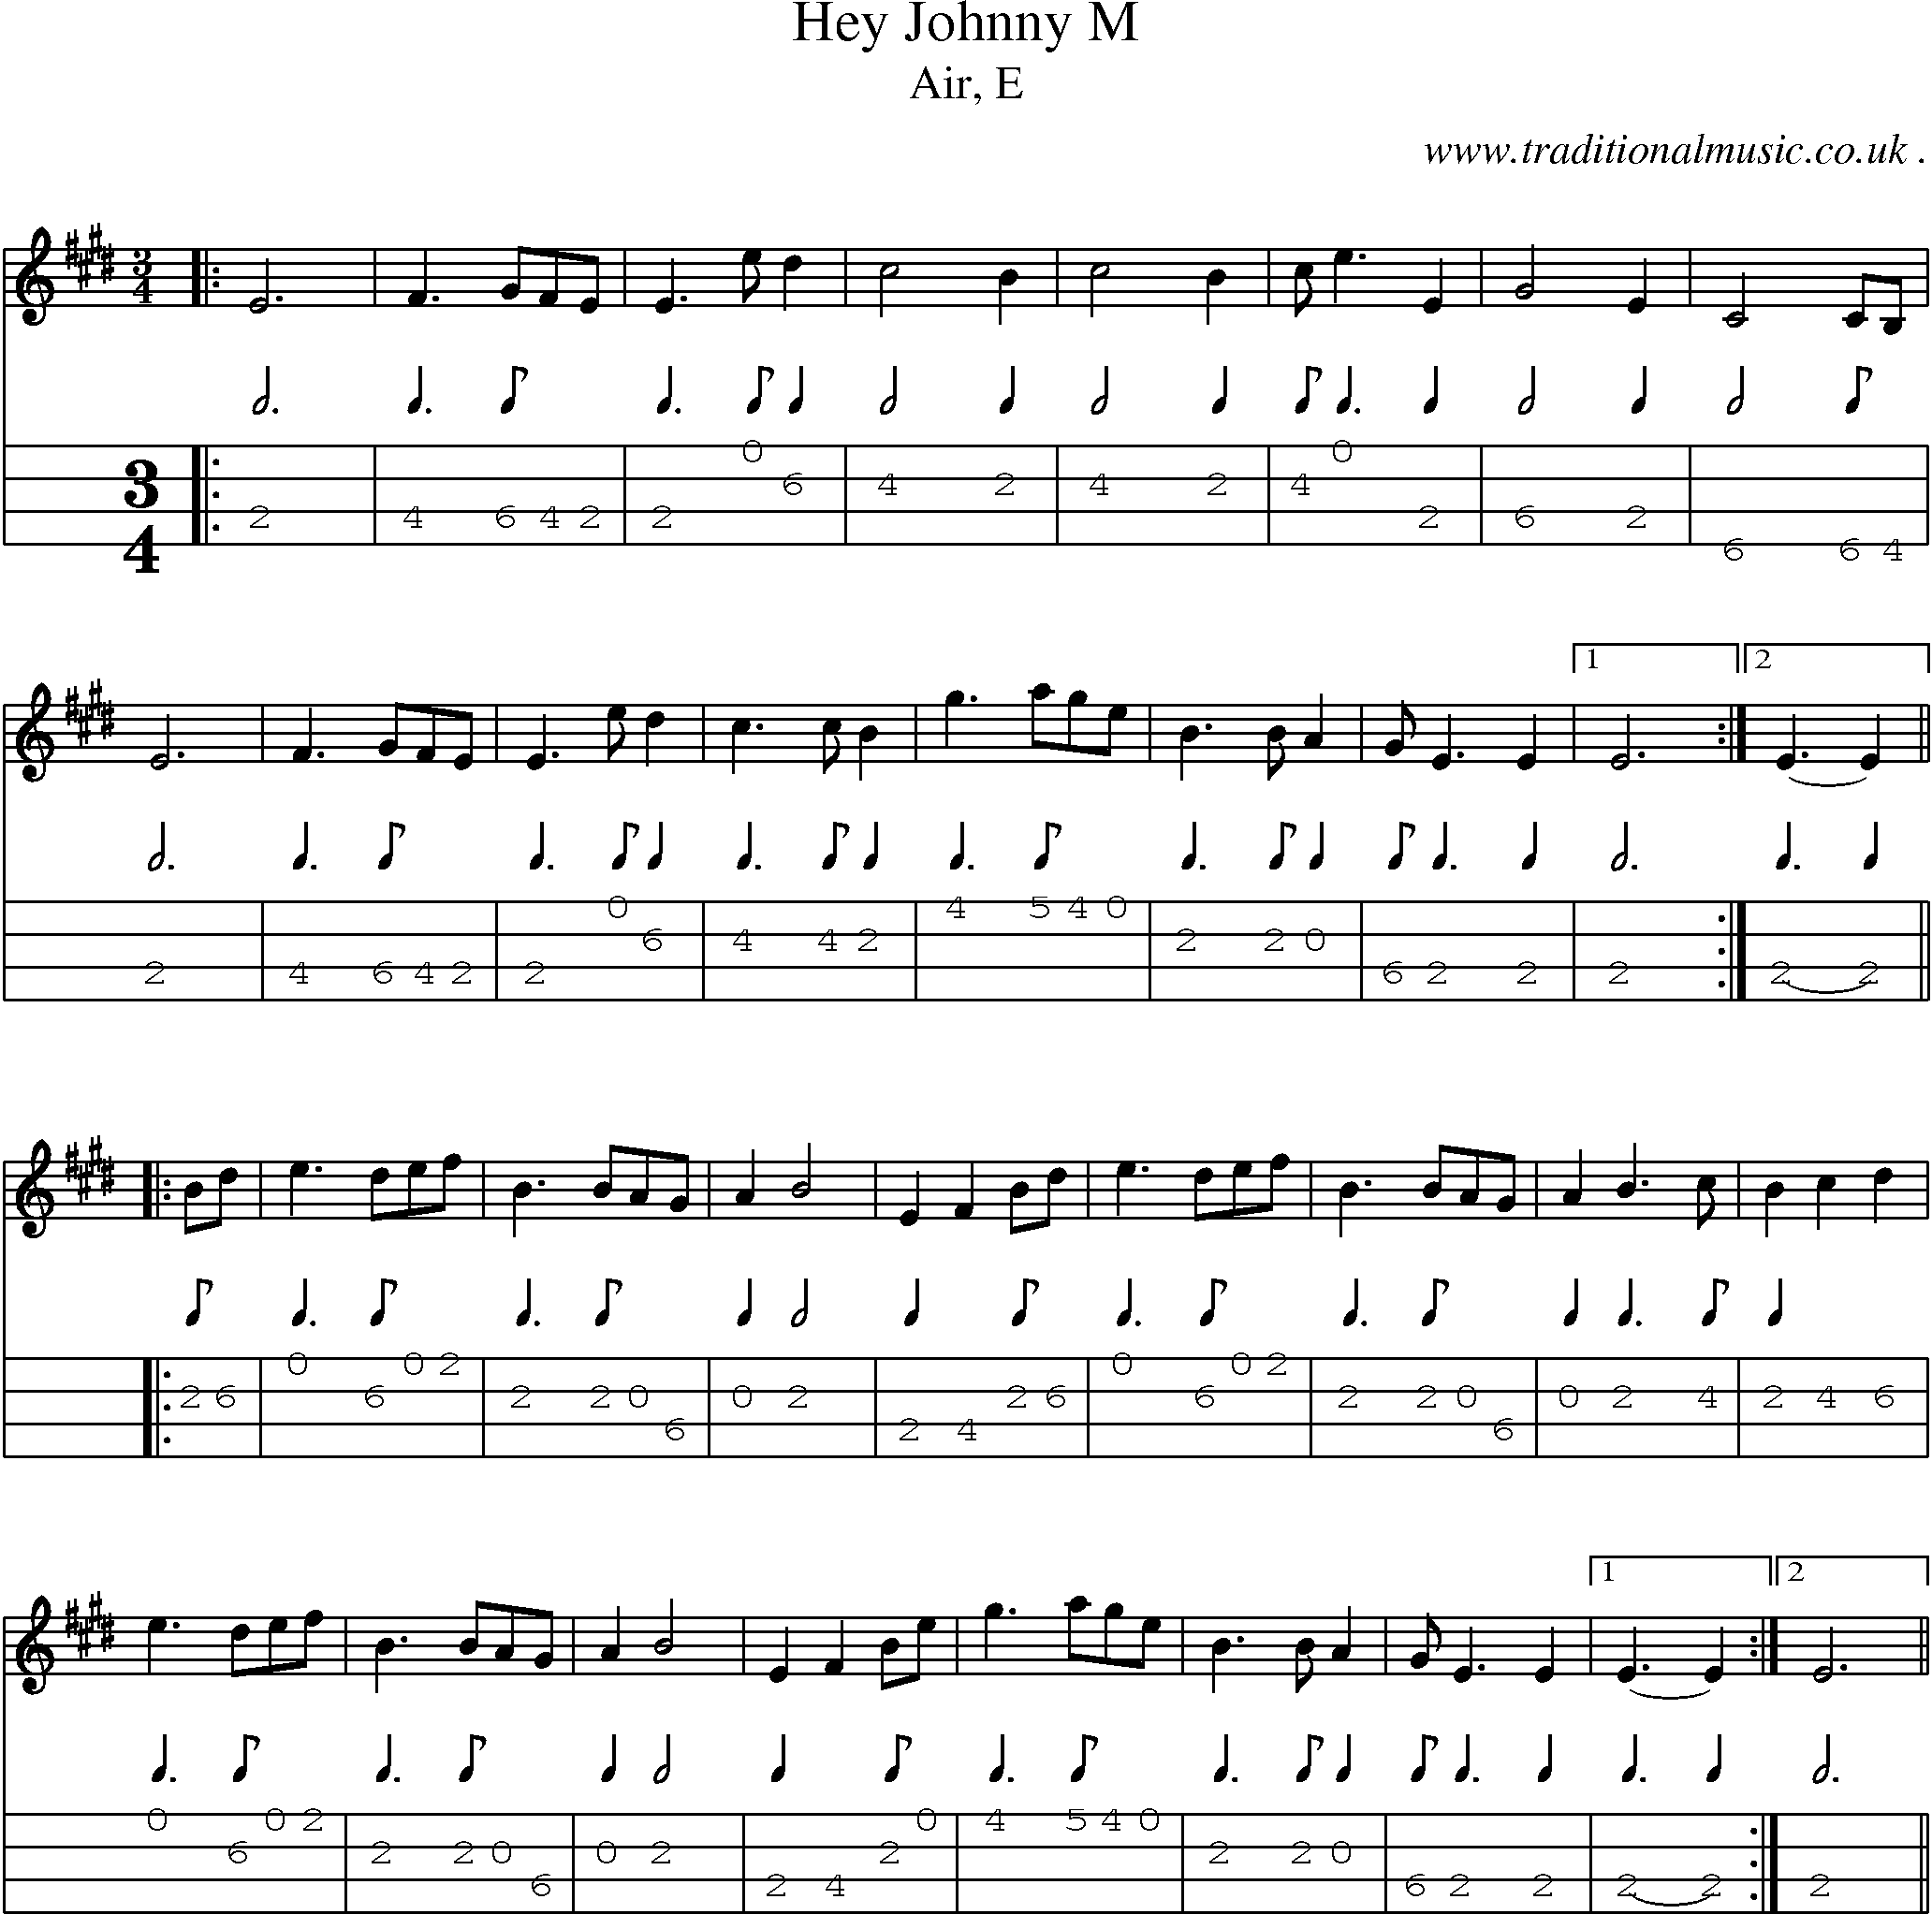 Sheet-music  score, Chords and Mandolin Tabs for Hey Johnny M